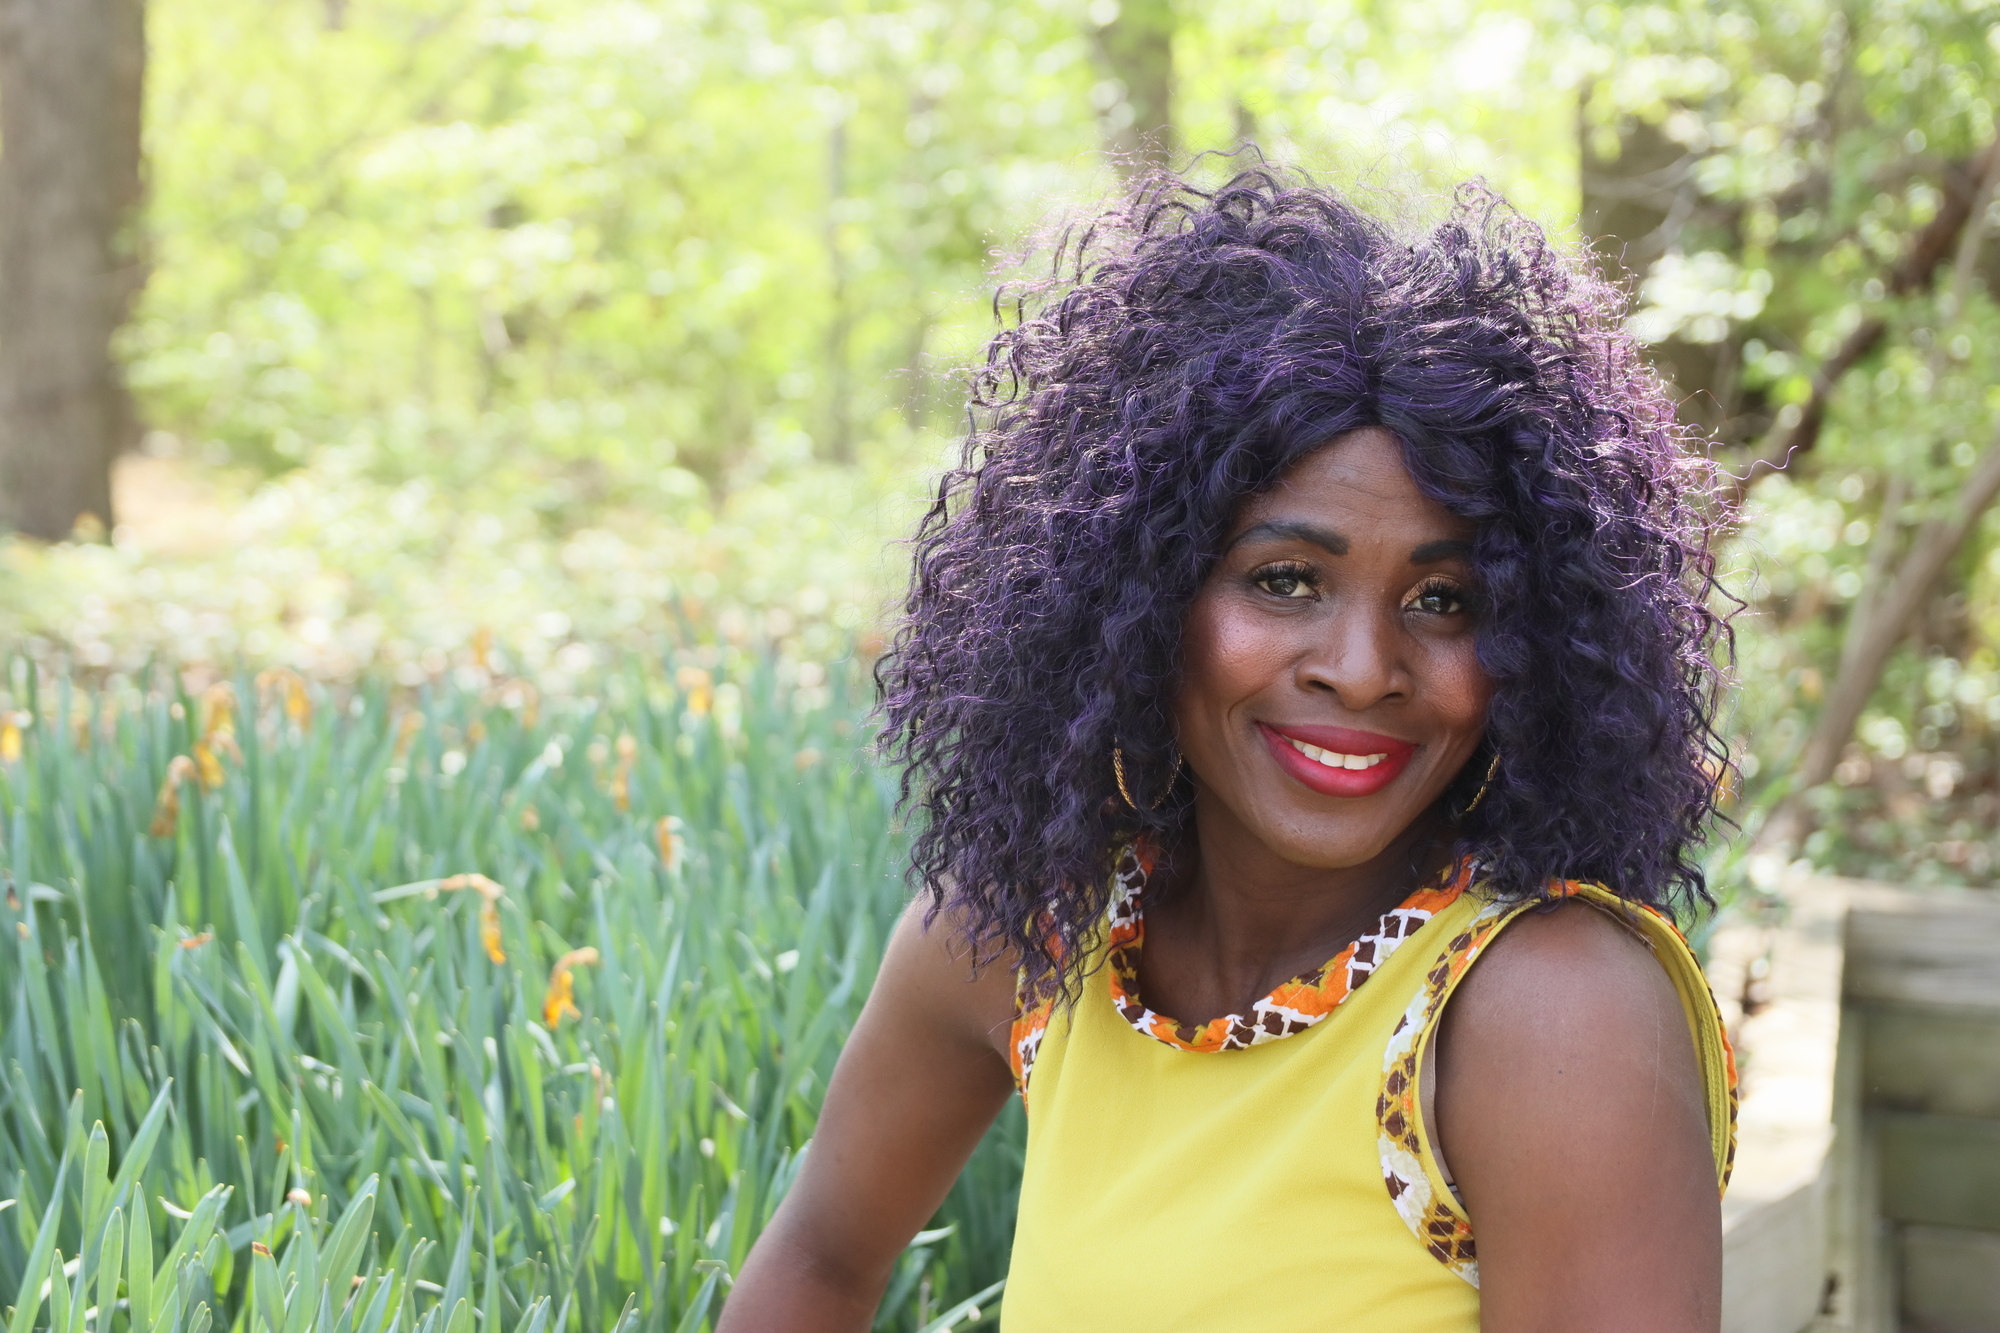 dark skinned woman in bright yellow colored dress smiles in a field of green